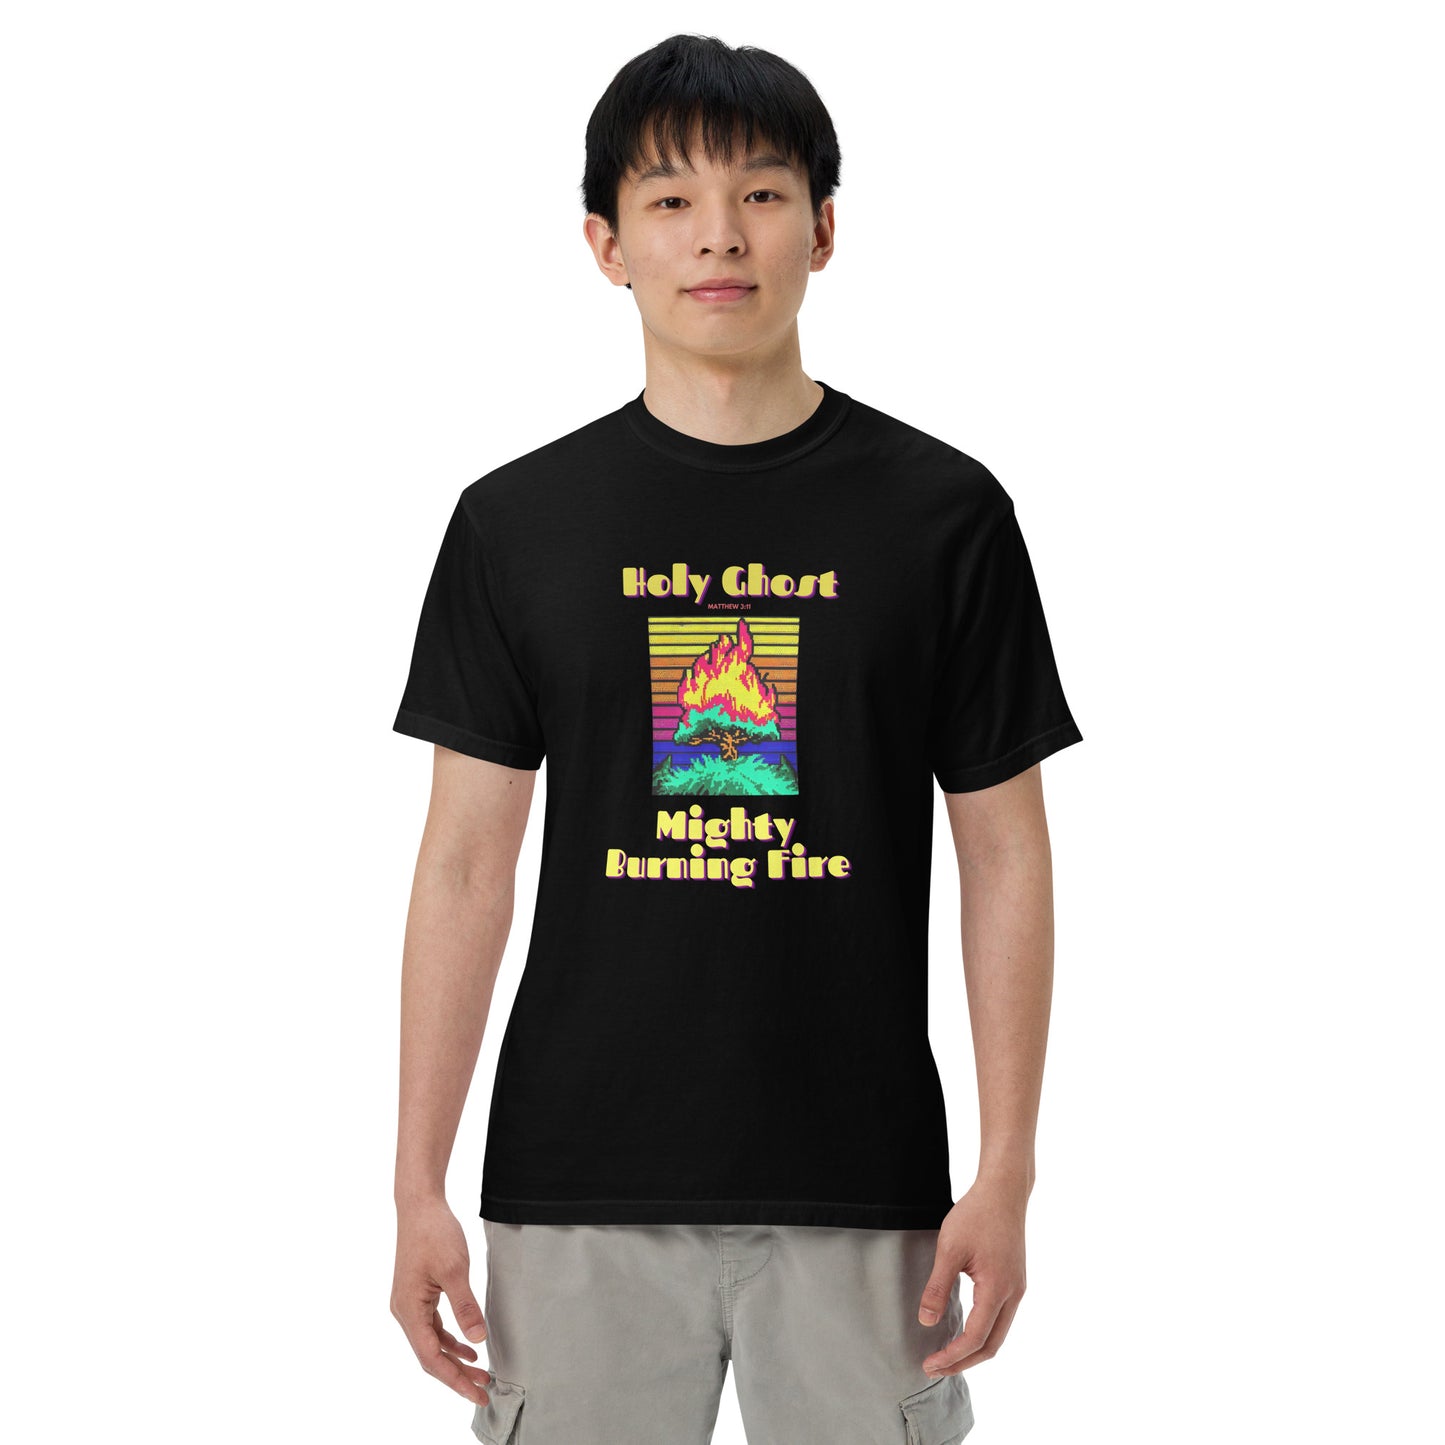 Holy Ghost Mighty Burning Fire Men’s Comfort Colors T-Shirt